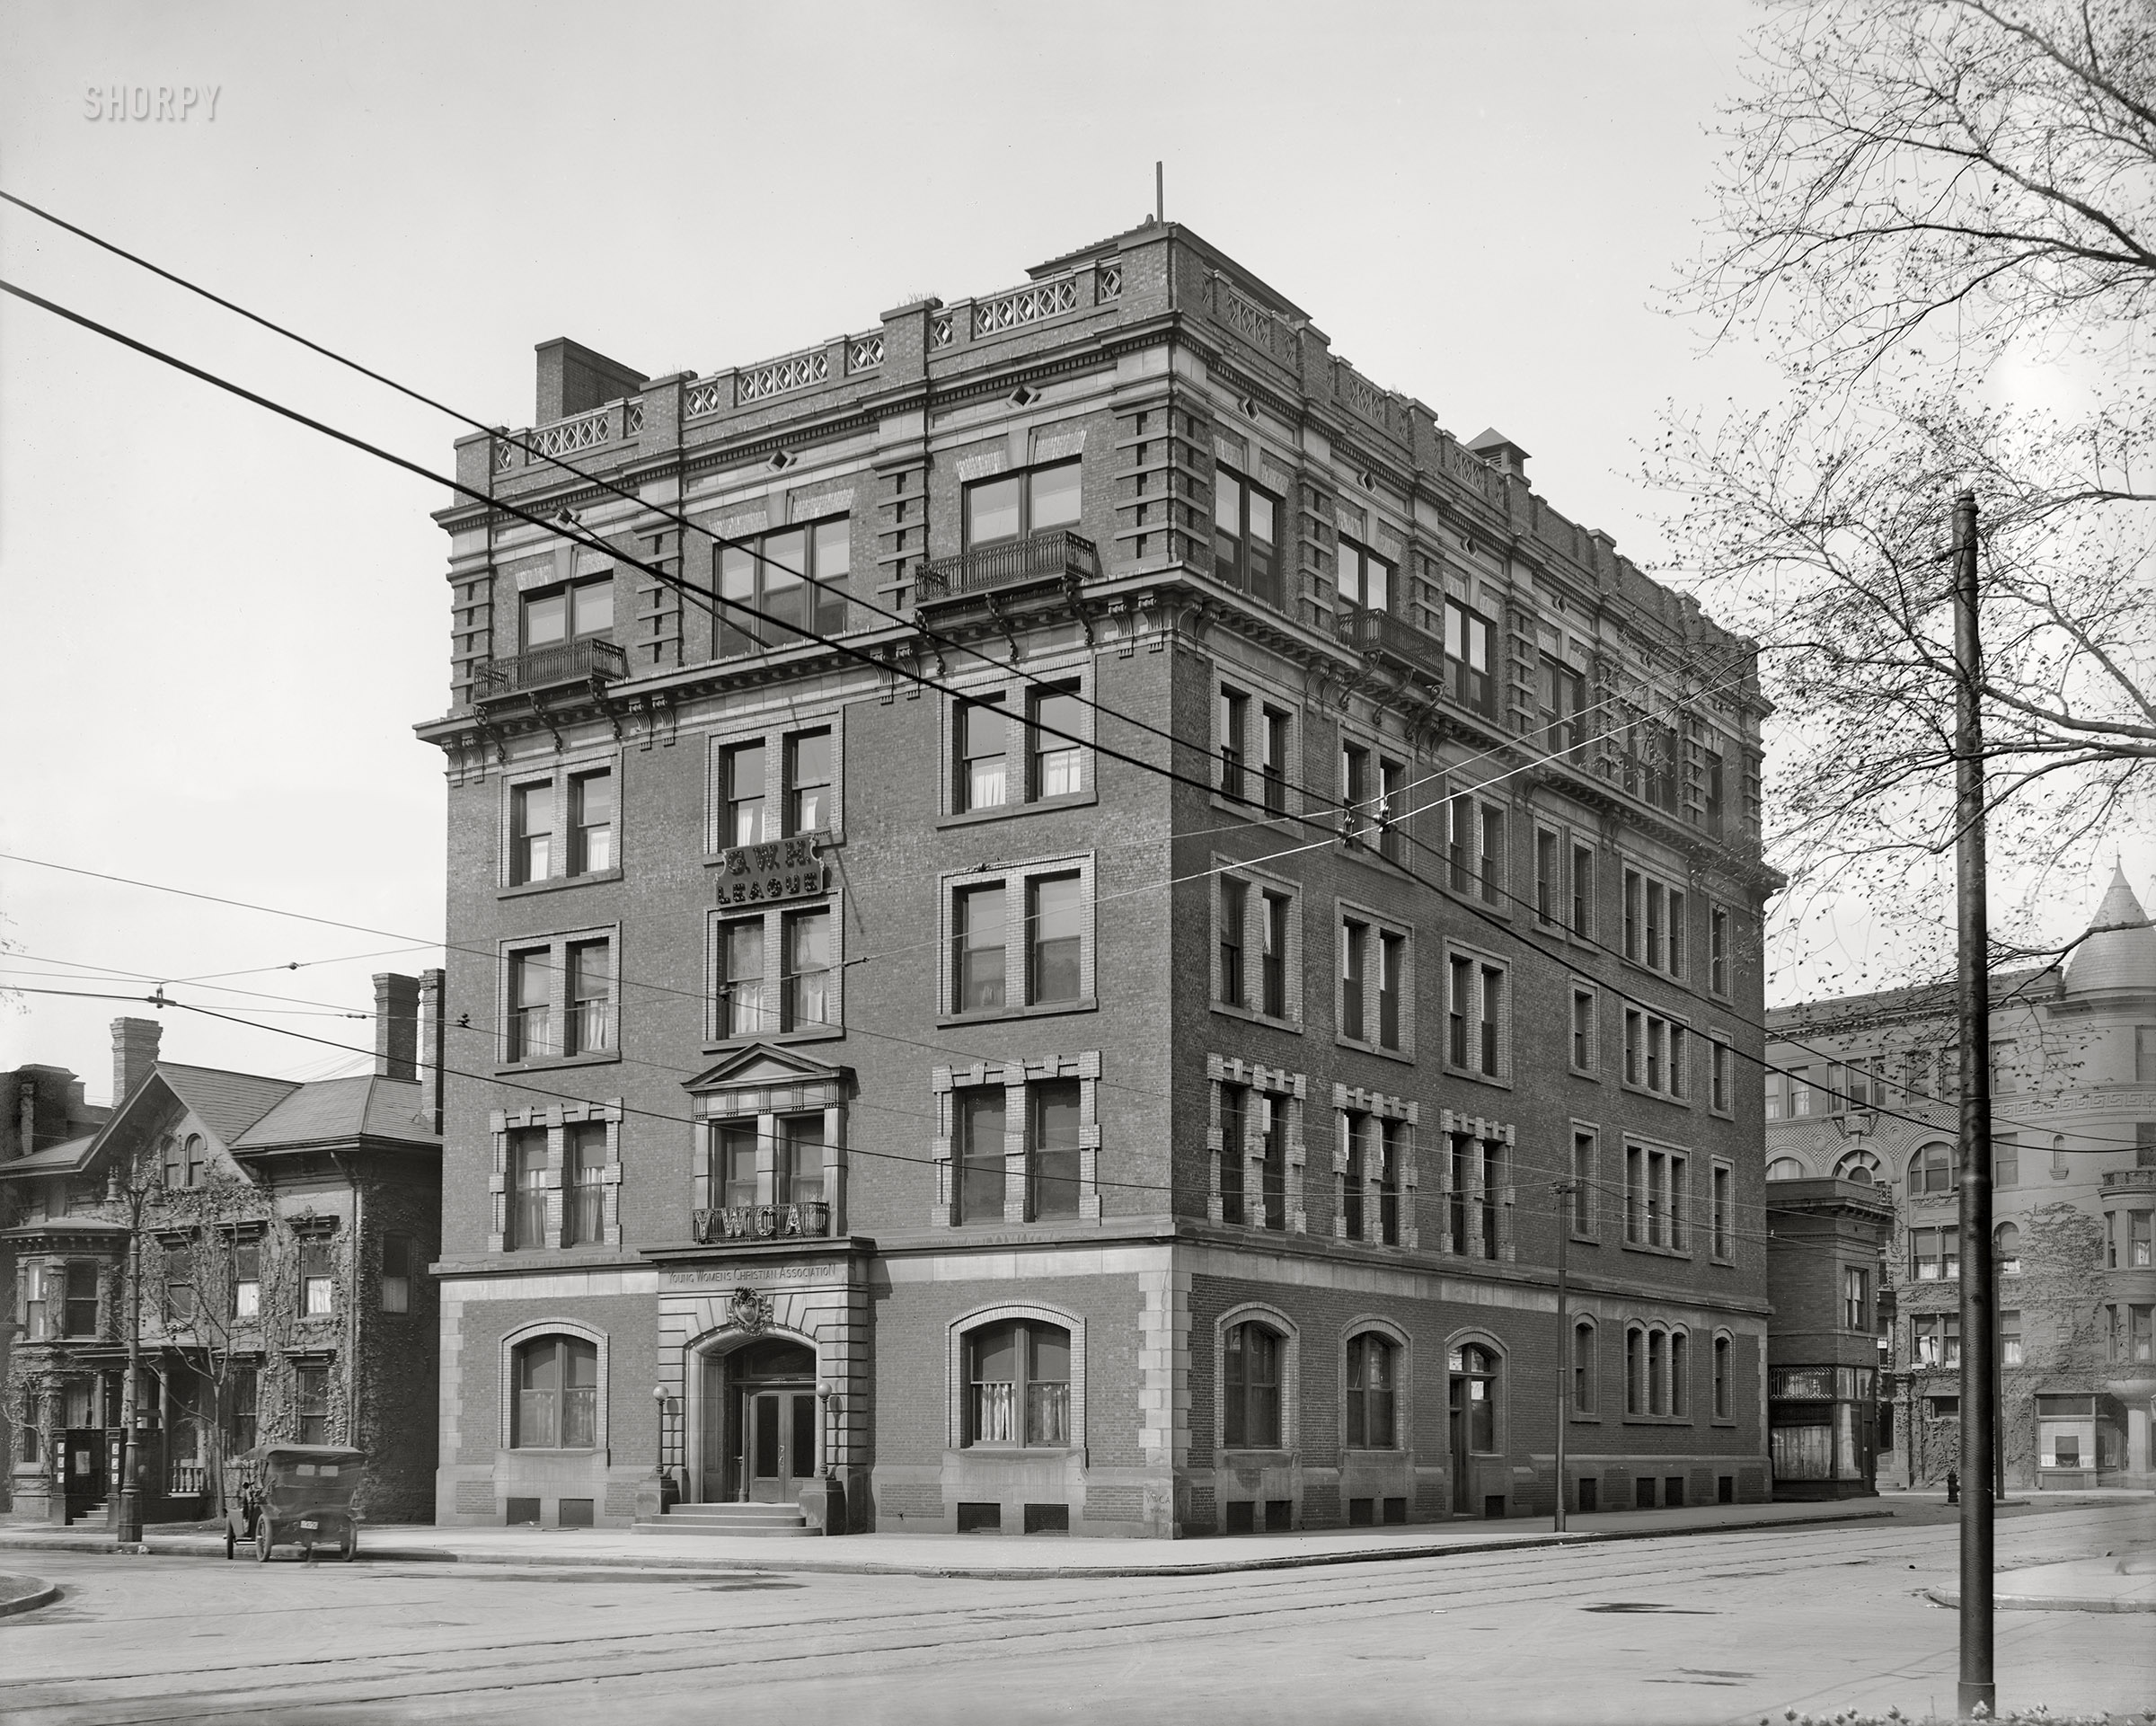 Detroit circa 1910. "Y.W.C.A., Washington Boulevard and Clifford Street." The building last glimpsed here. 8x10 inch glass negative, Detroit Publishing Company. View full size.